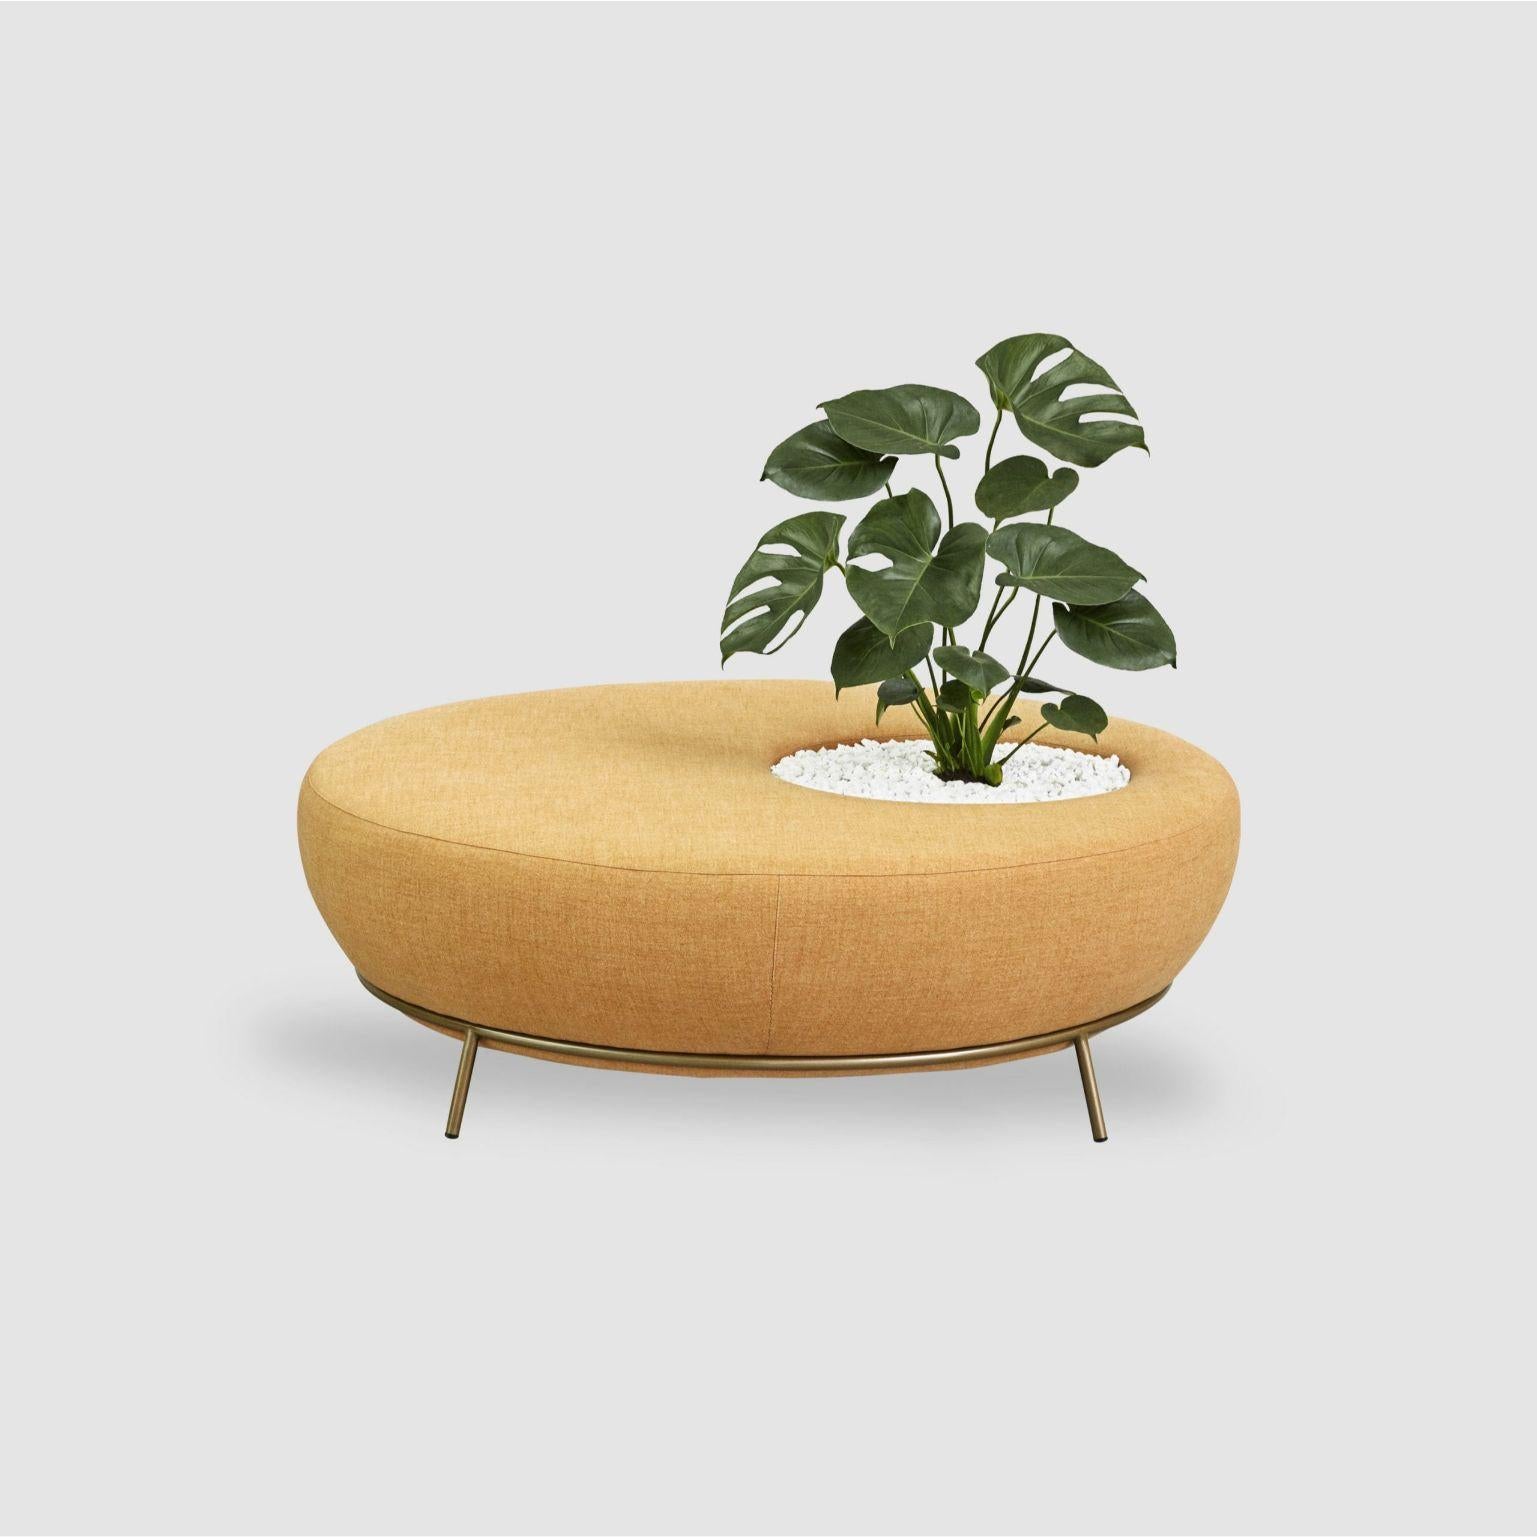 Nest Round sofa planter by Paula Rosales
Dimensions: W140, D140, H44
Materials: Iron structure and MDF board
Foam CMHR (high resilience and flame retardant) for all our cushion filling systems
Painted or chromed legs
Stainless steel